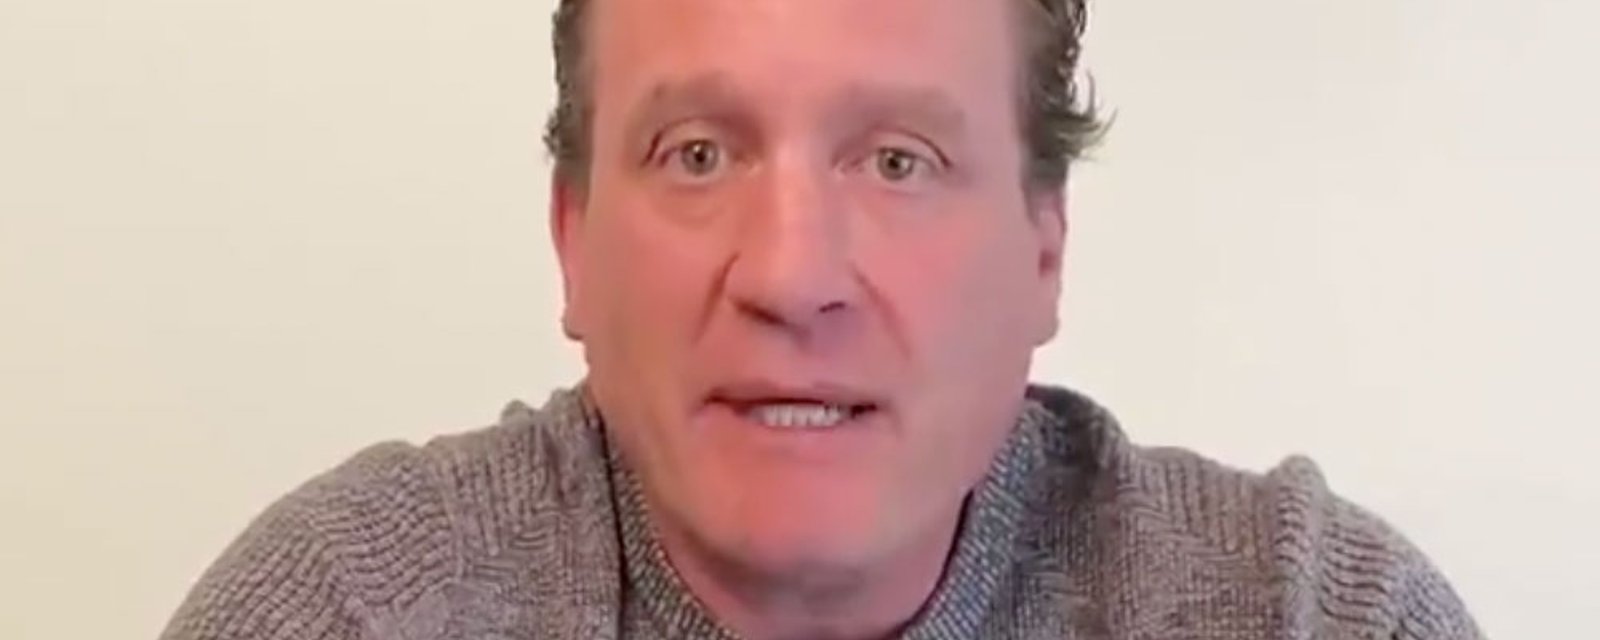 Jeremy Roenick announces controversial decision from NBC on his employment status 